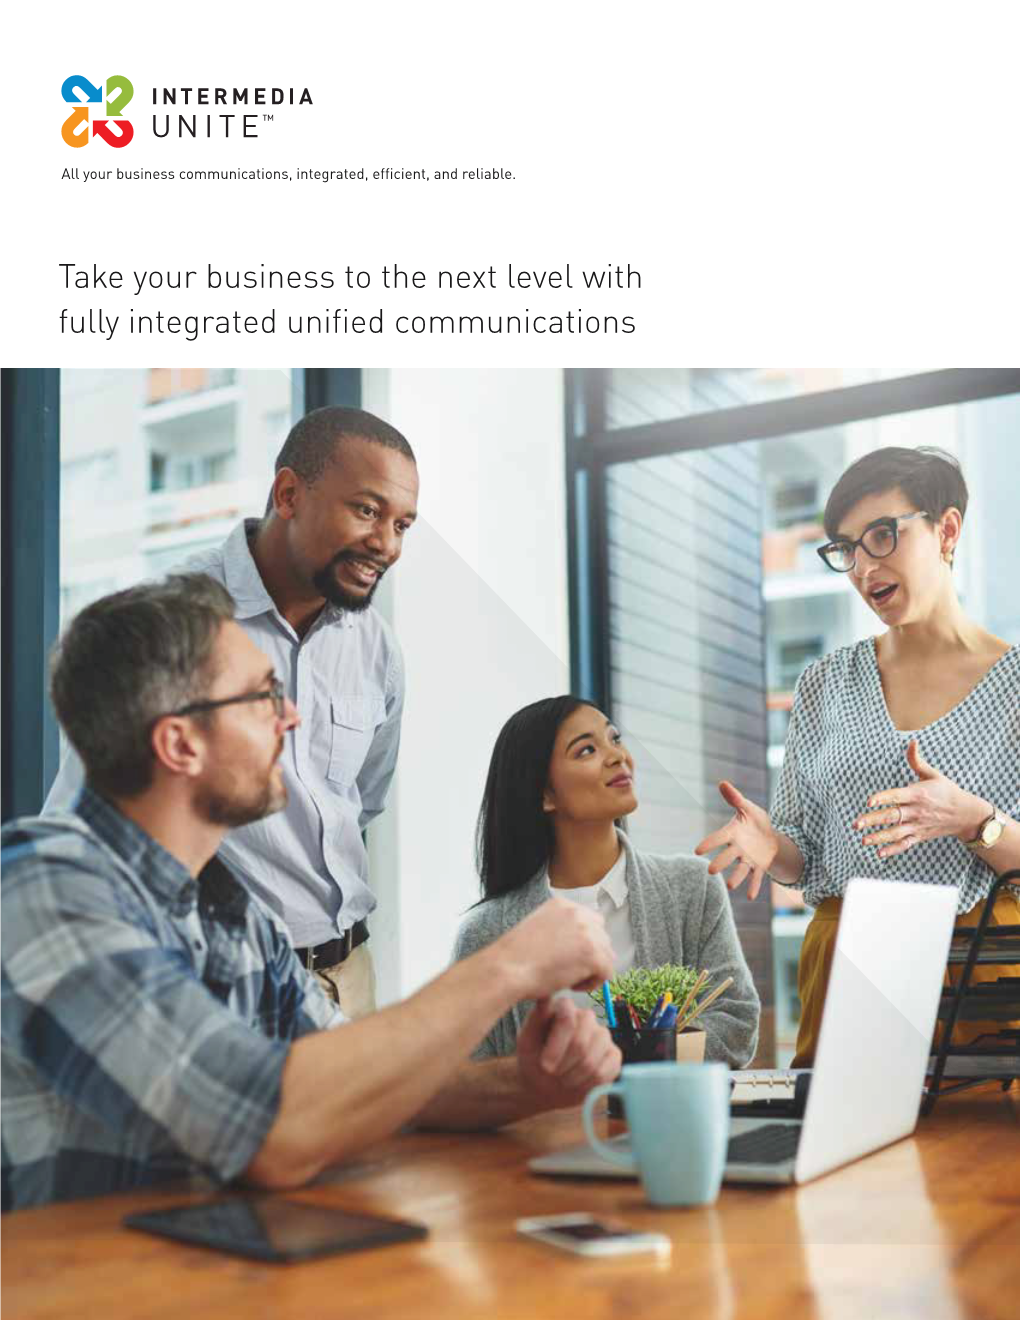 Take Your Business to the Next Level with Fully Integrated Unified Communications